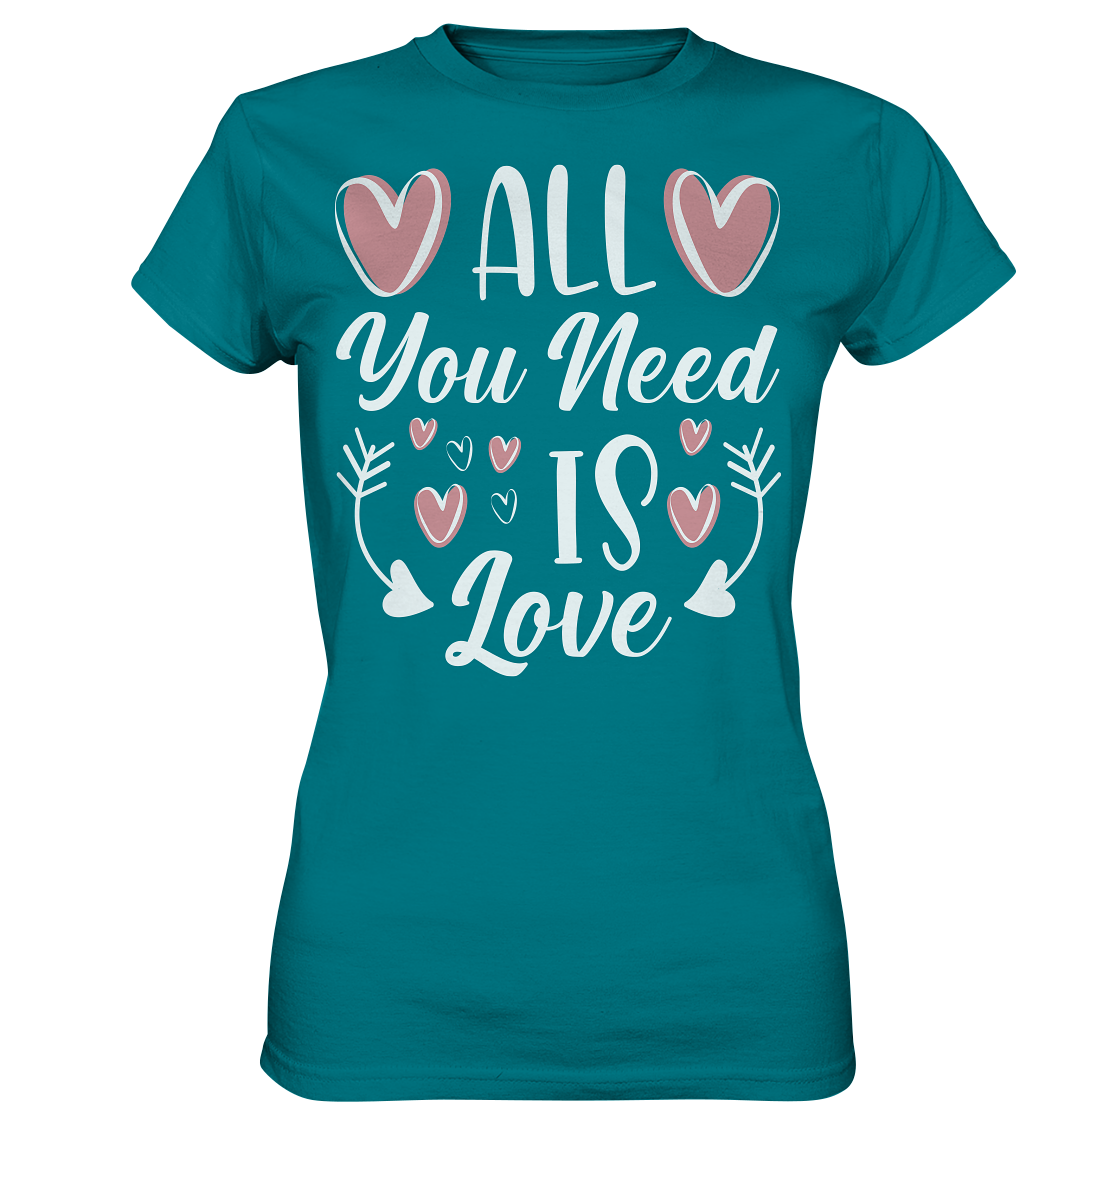 All You need is Love - Ladies Premium Shirt